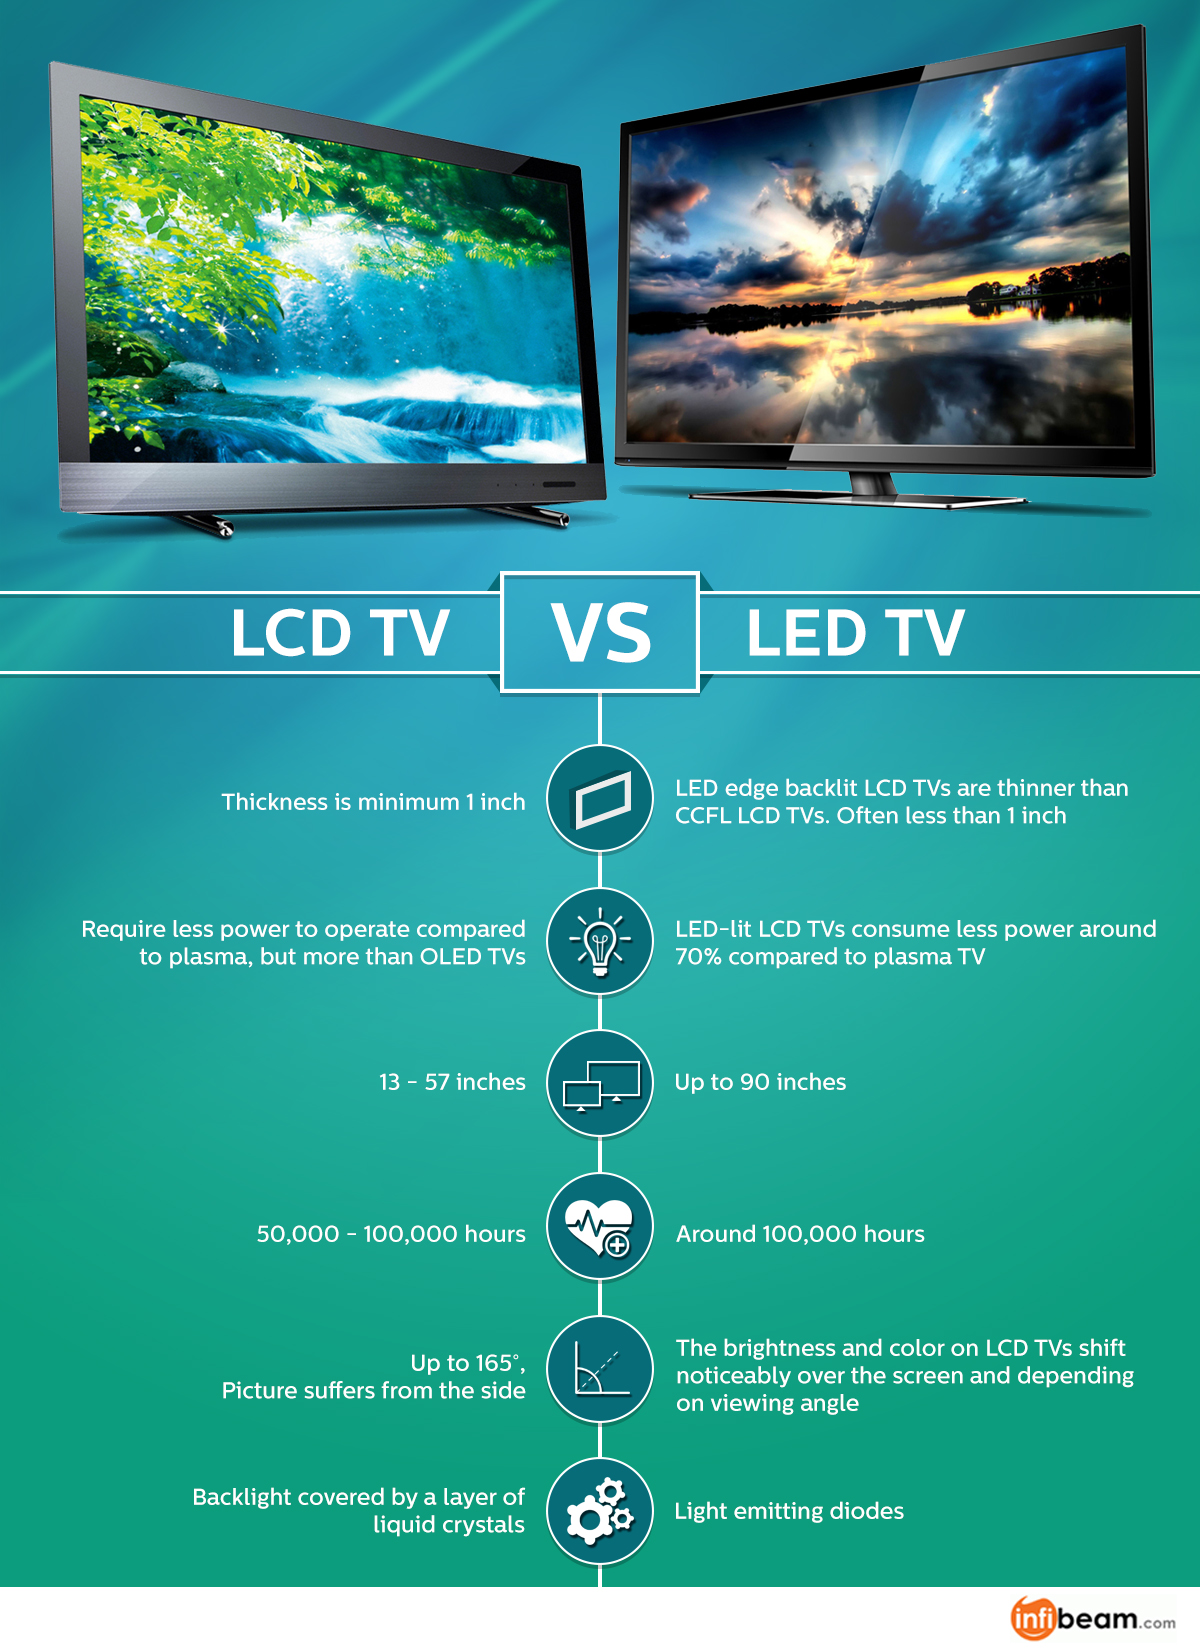 What Are The Energy Consumption Differences Between LED And LCD TVs?